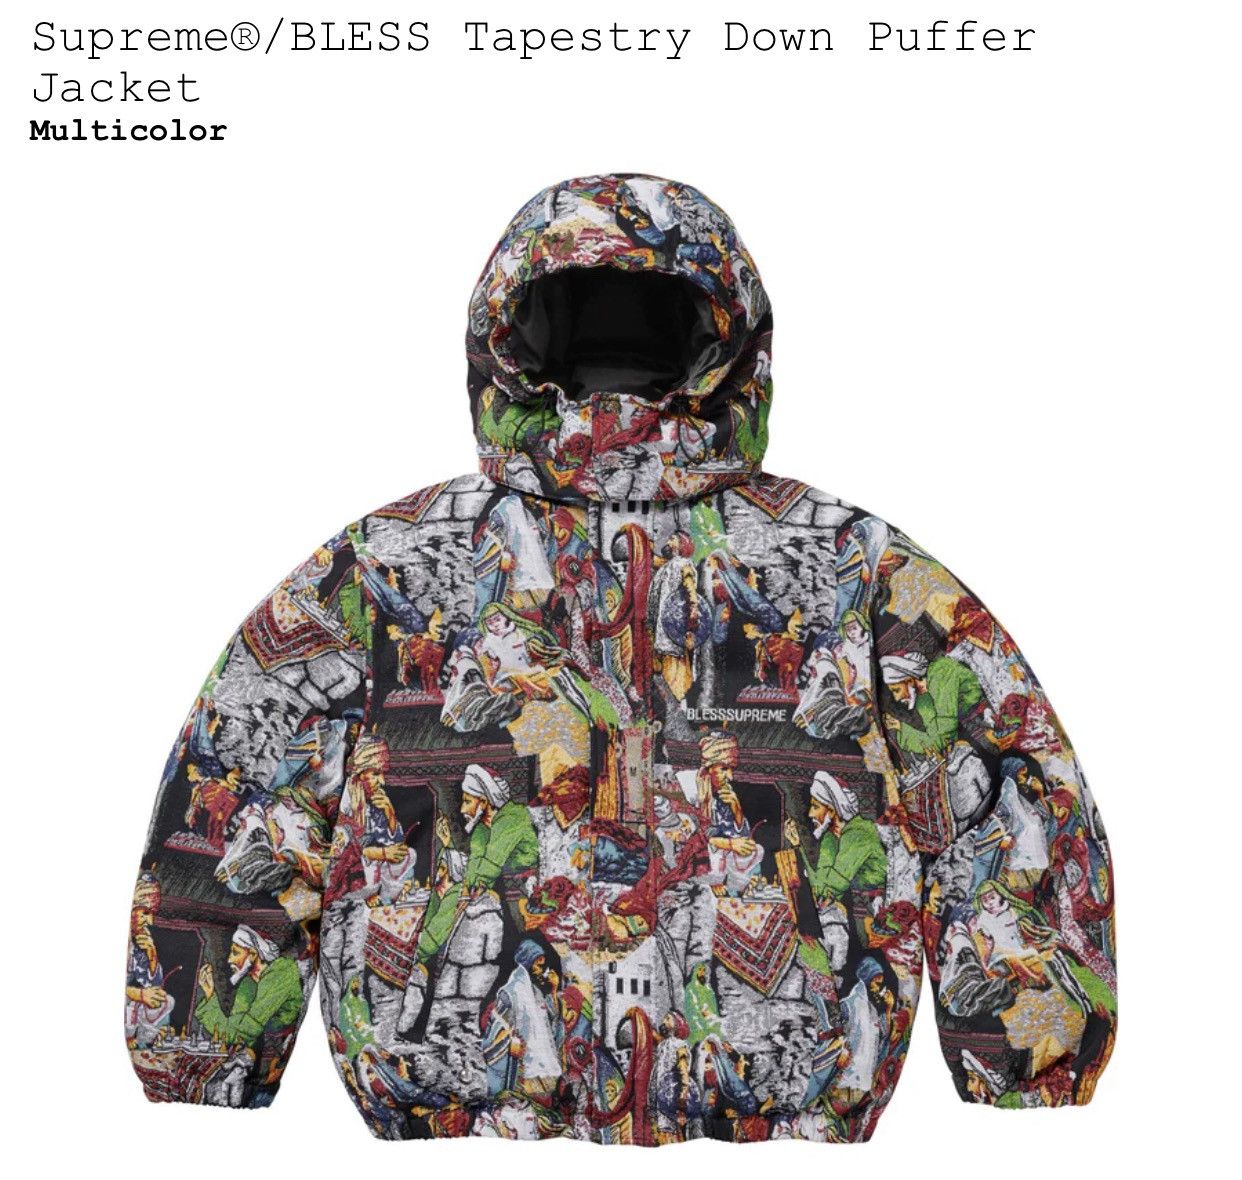 Supreme Supreme Bless Tapestry Down Puffer Jacket | Grailed